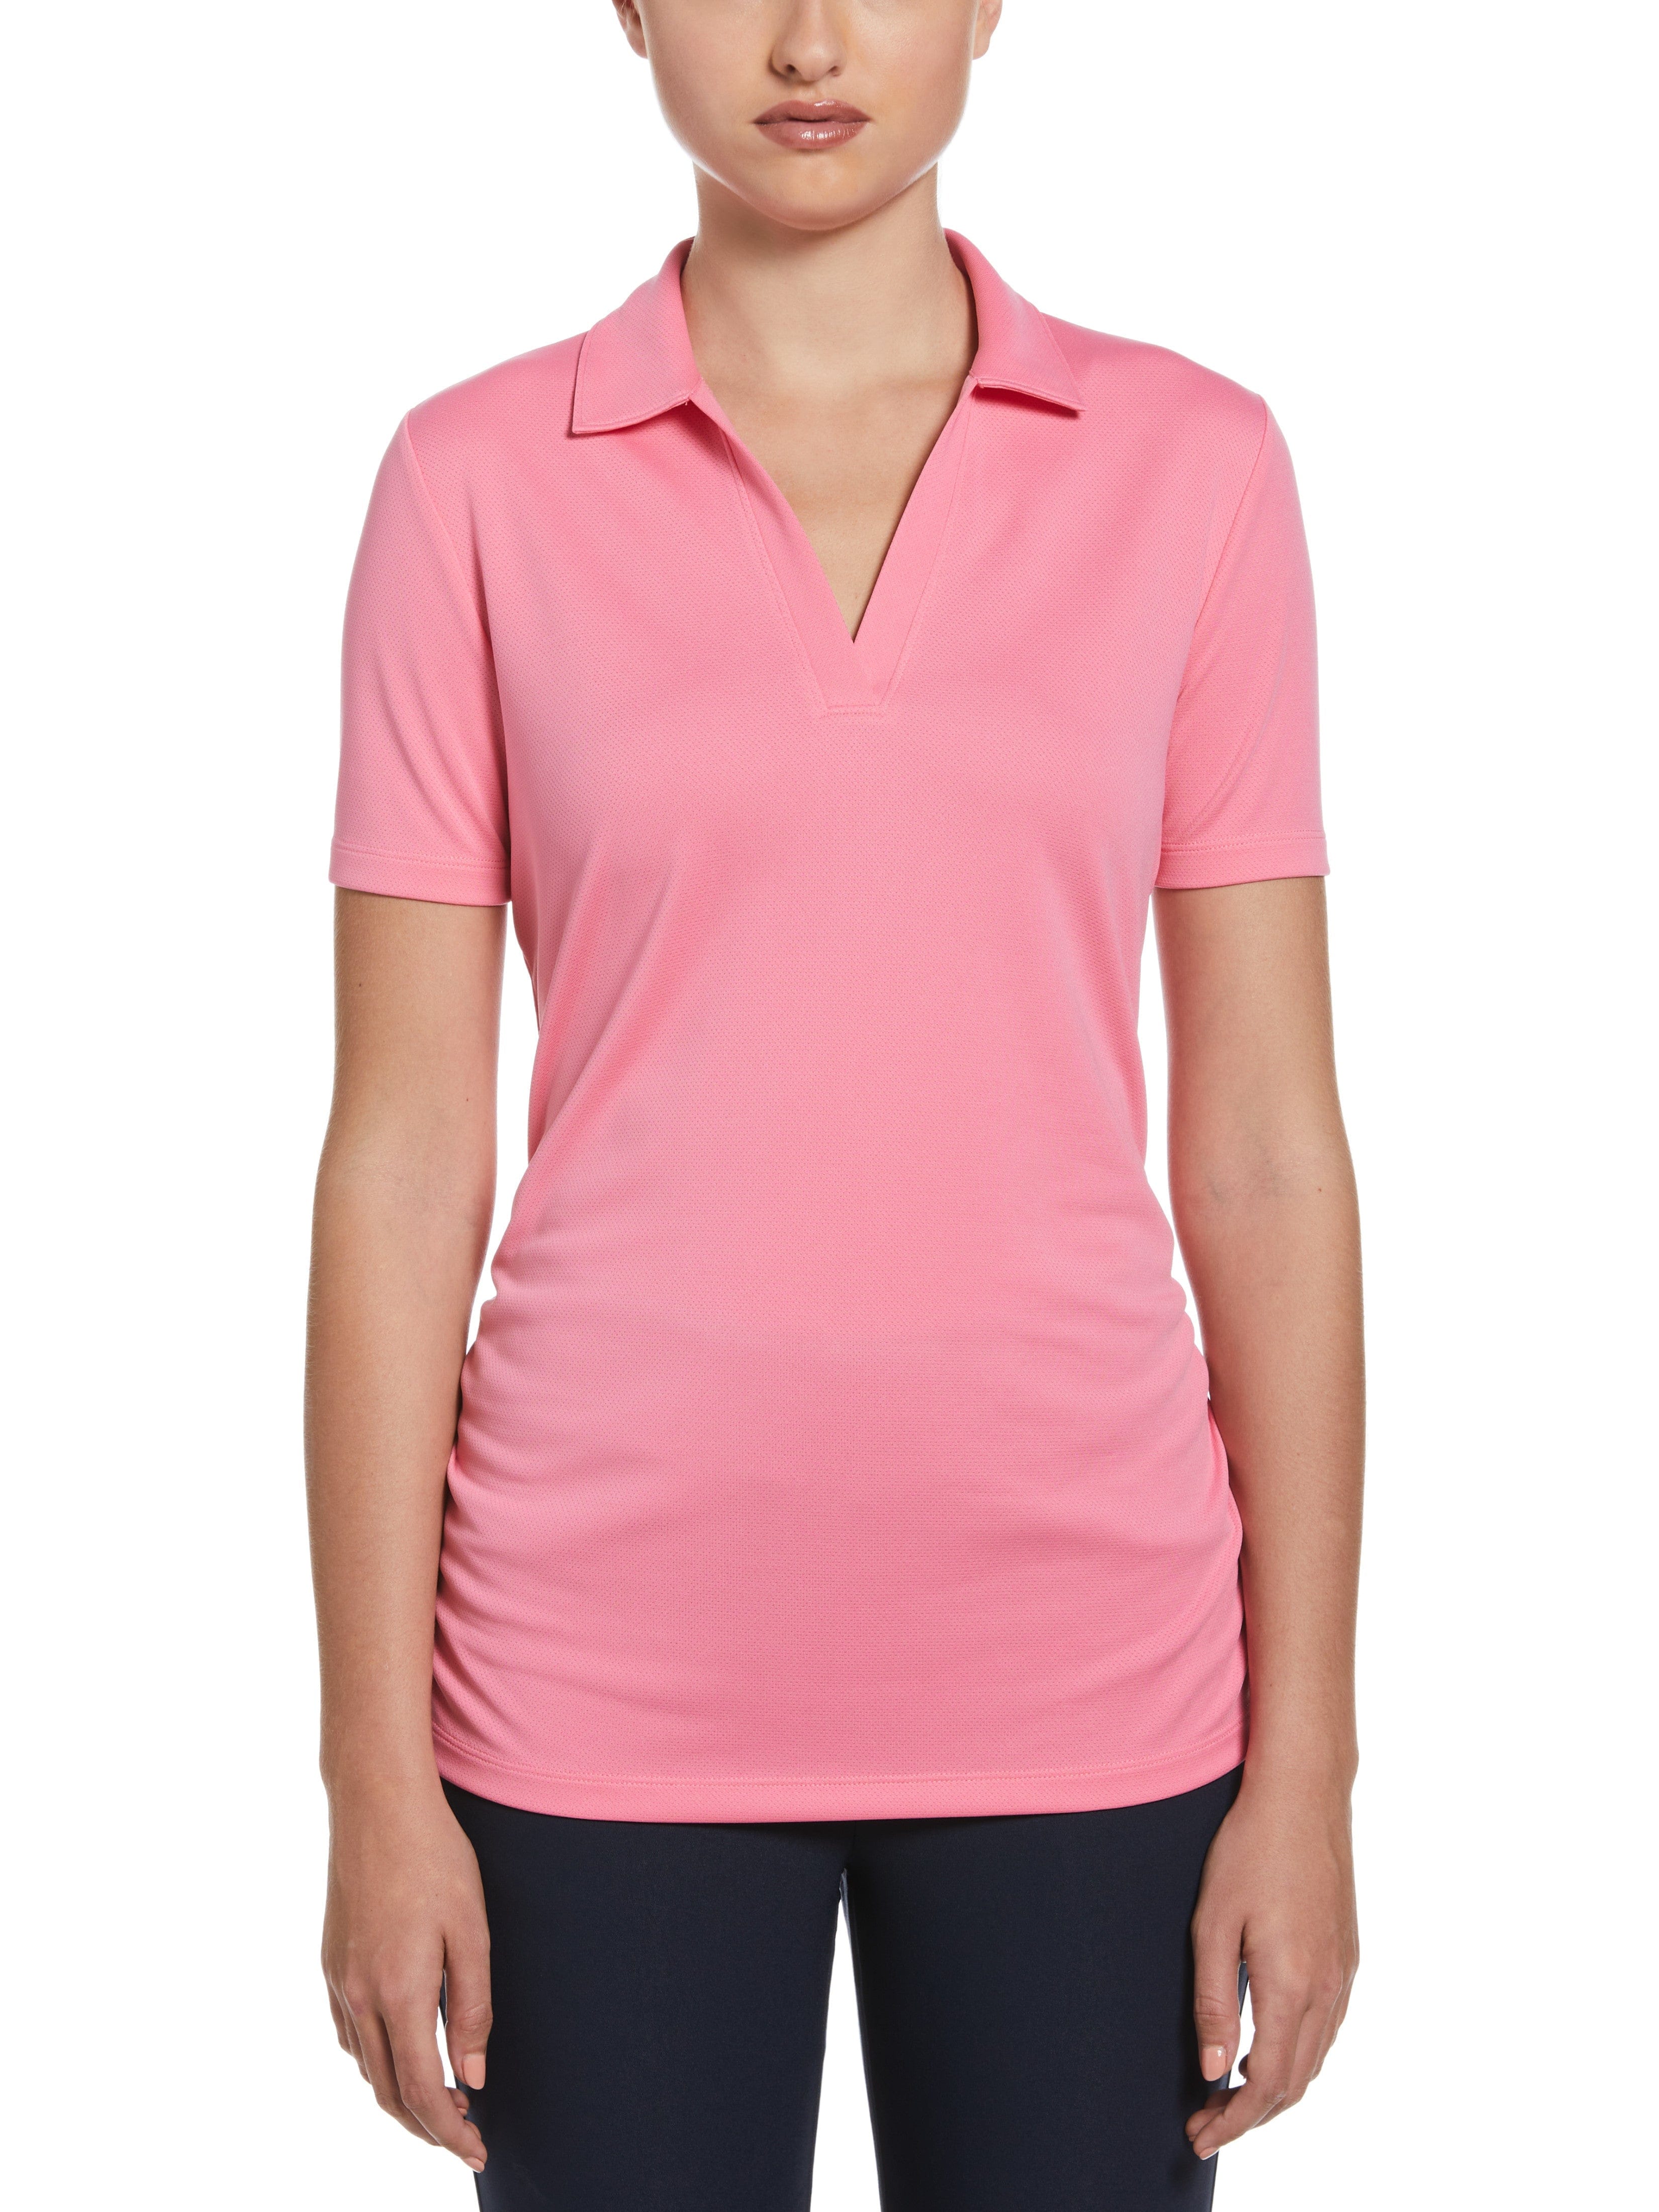 PGA TOUR Apparel Womens AirFlux™ Solid Golf Polo Shirt, Size XS, Flowering Ginger Pink, 100% Polyester | Golf Apparel Shop